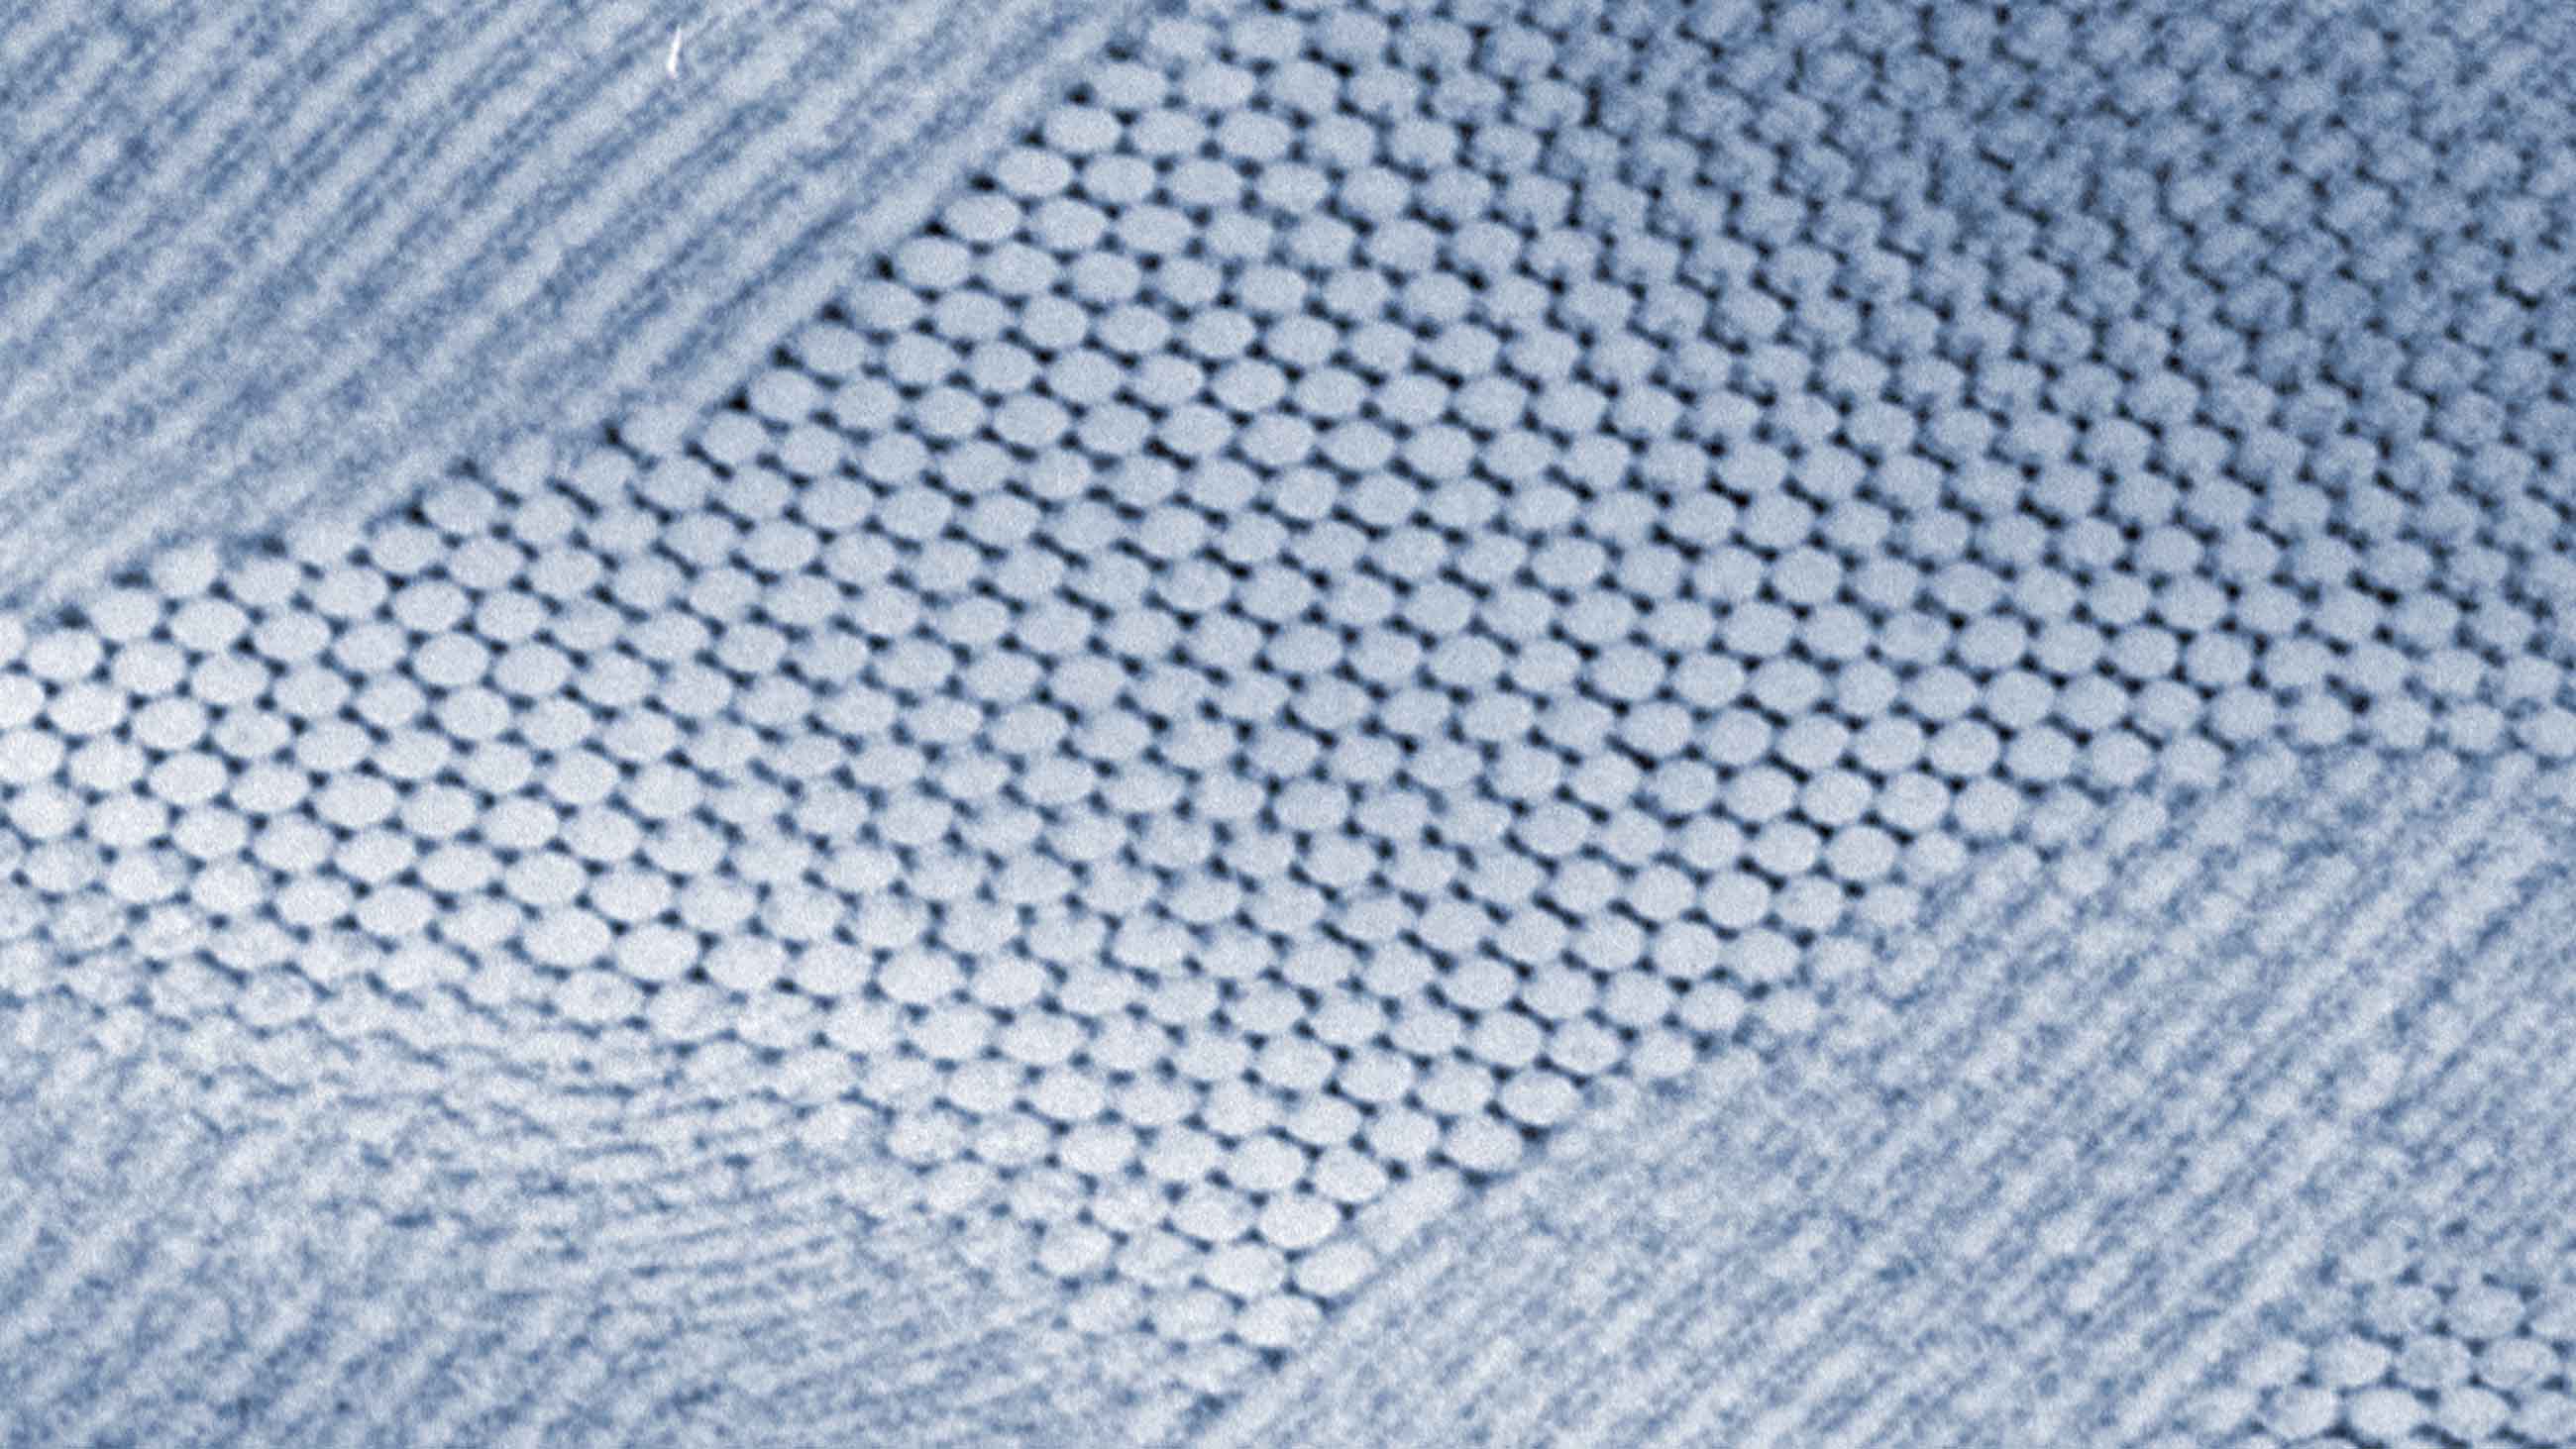 This electron micrograph shows a self-assembled composite in which nanoparticles of lead sulfide have arranged themselves in a hexagonal grid.